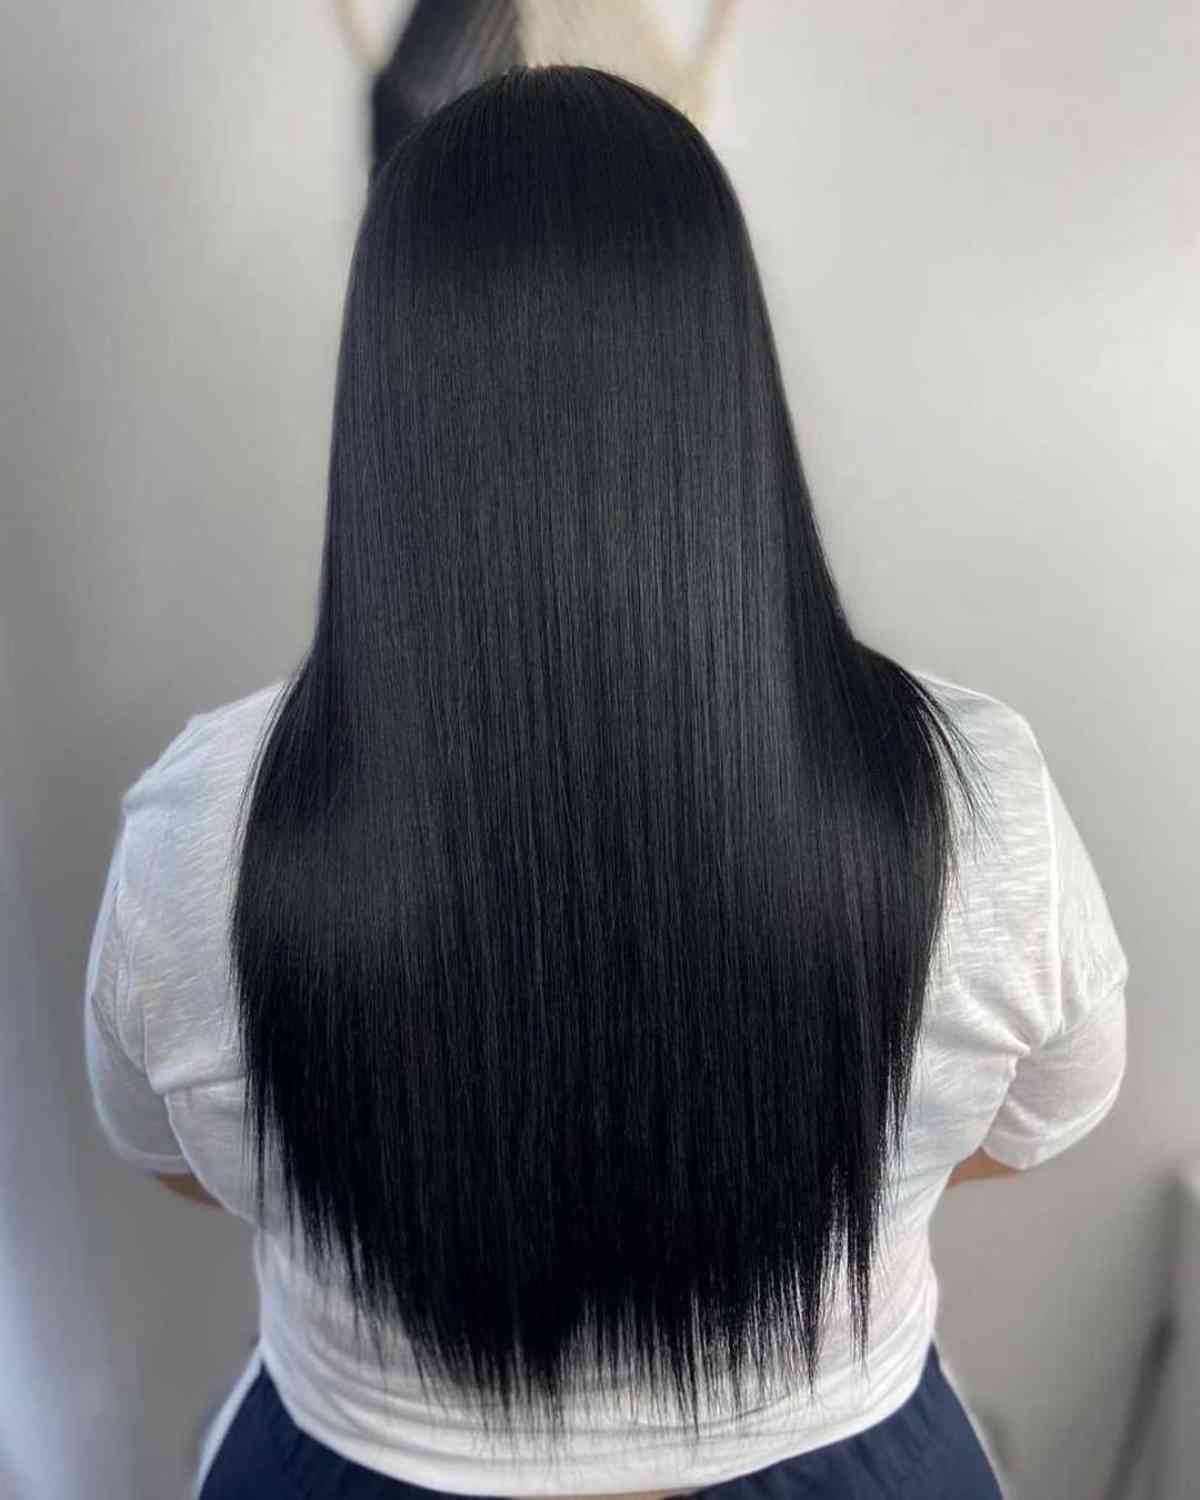 Sleek Long Black Hair with Textured Ends